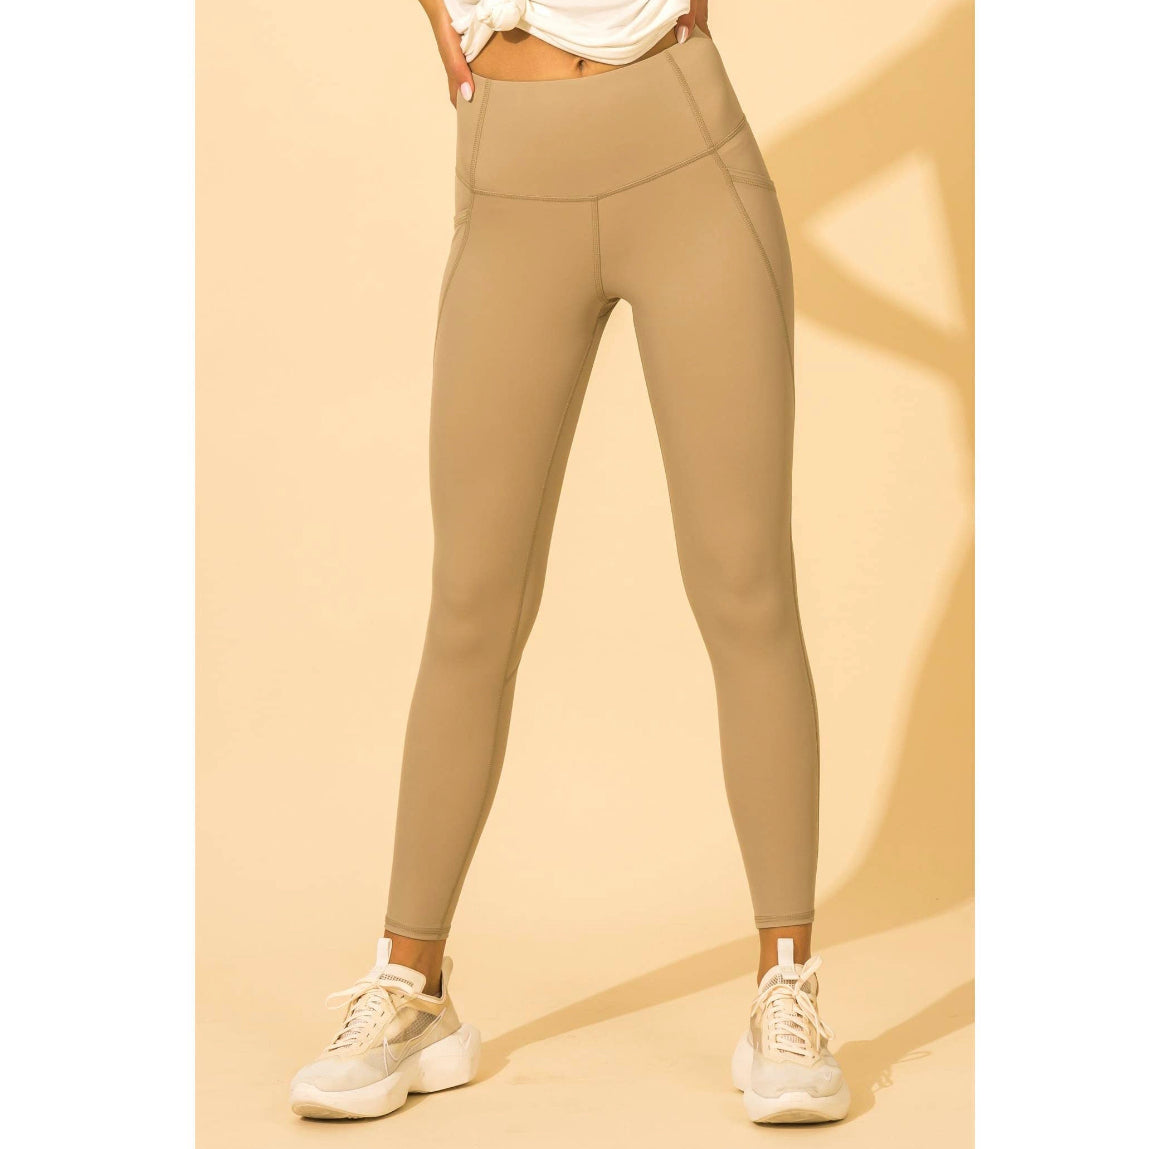 (Multiple Colors) OUT N ABOUT HIGH WAIST LEGGINGS